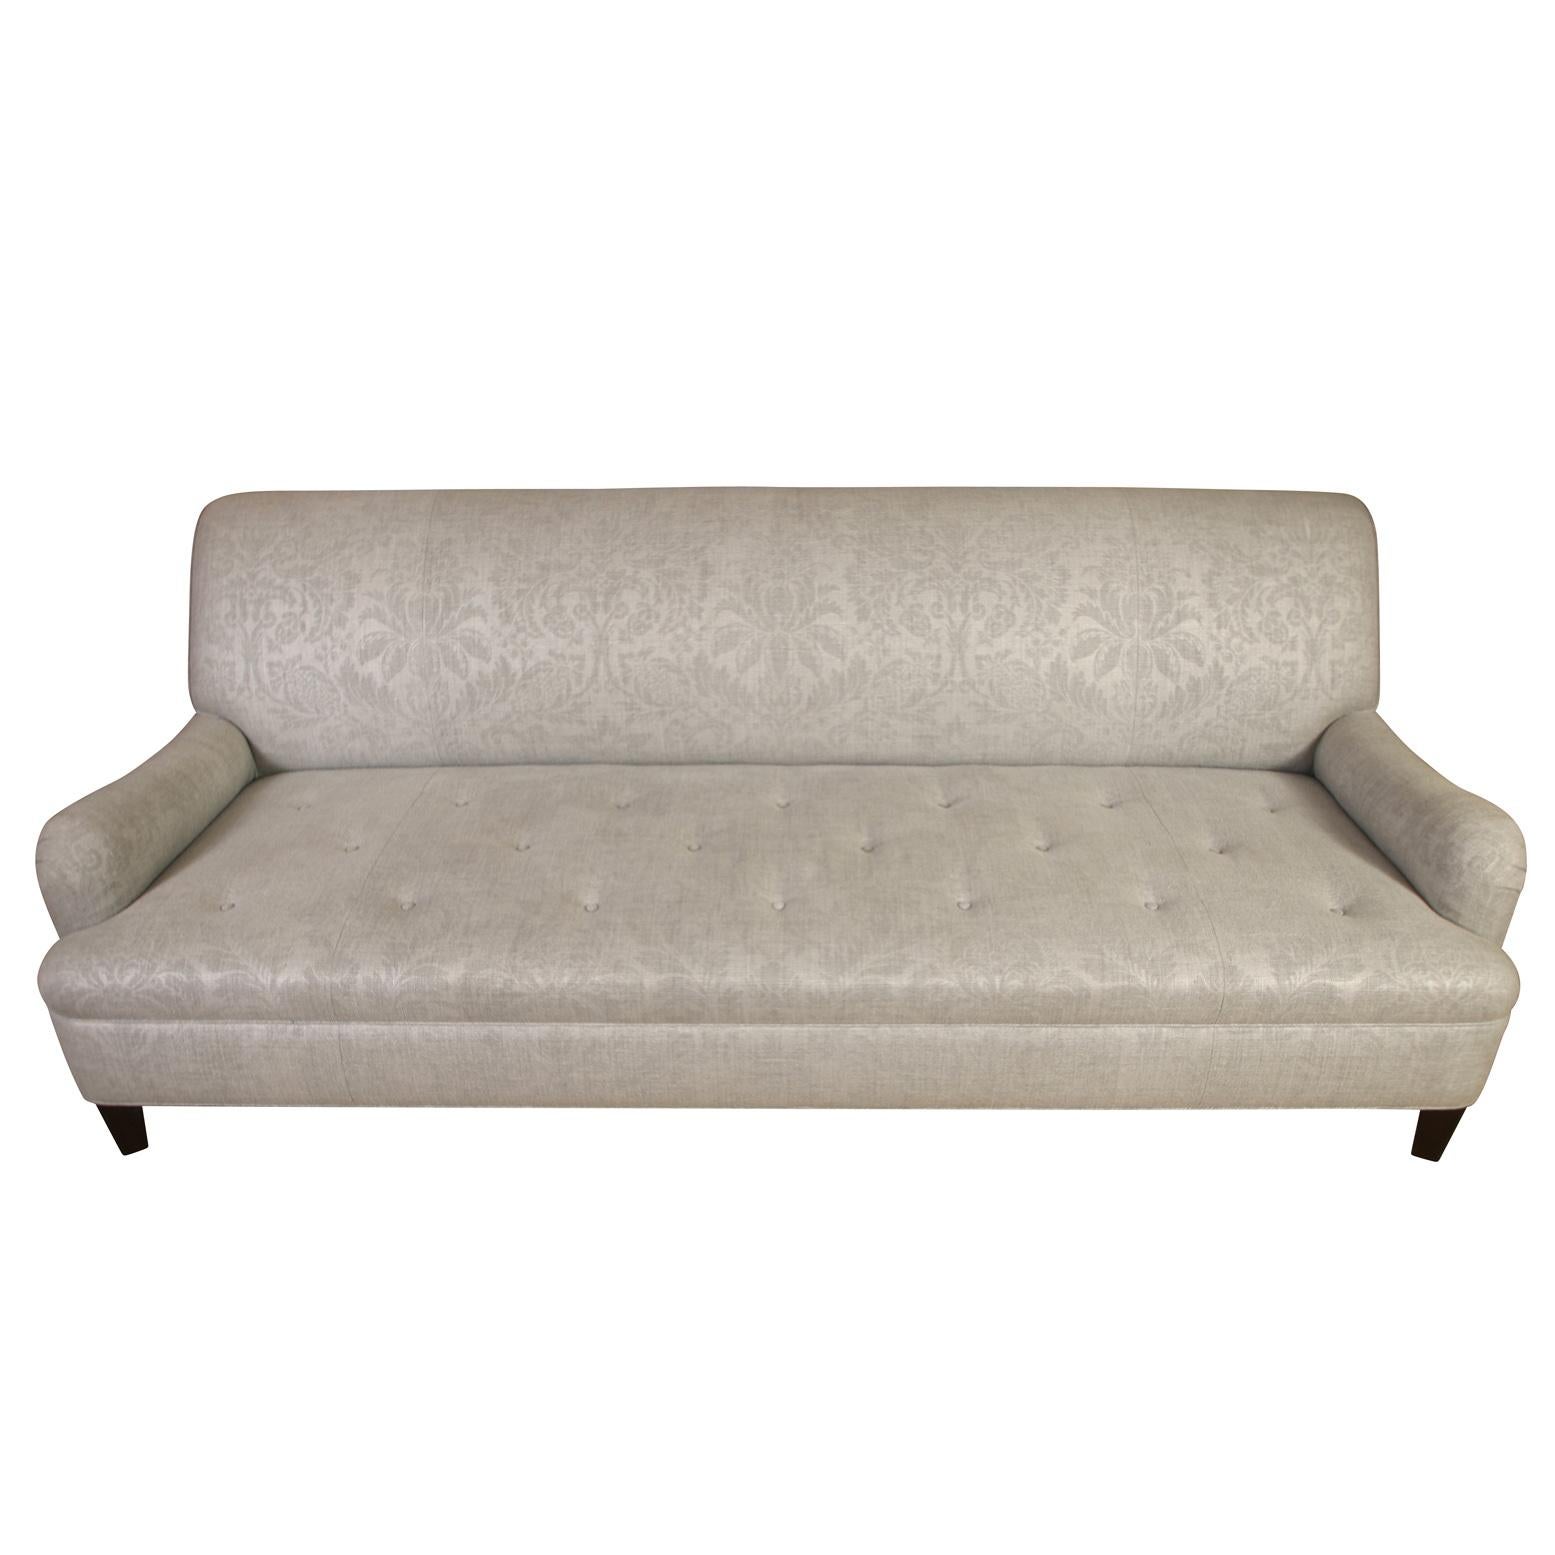 20th Century Silver Jacquard Sofa With Tufted Seat For Sale